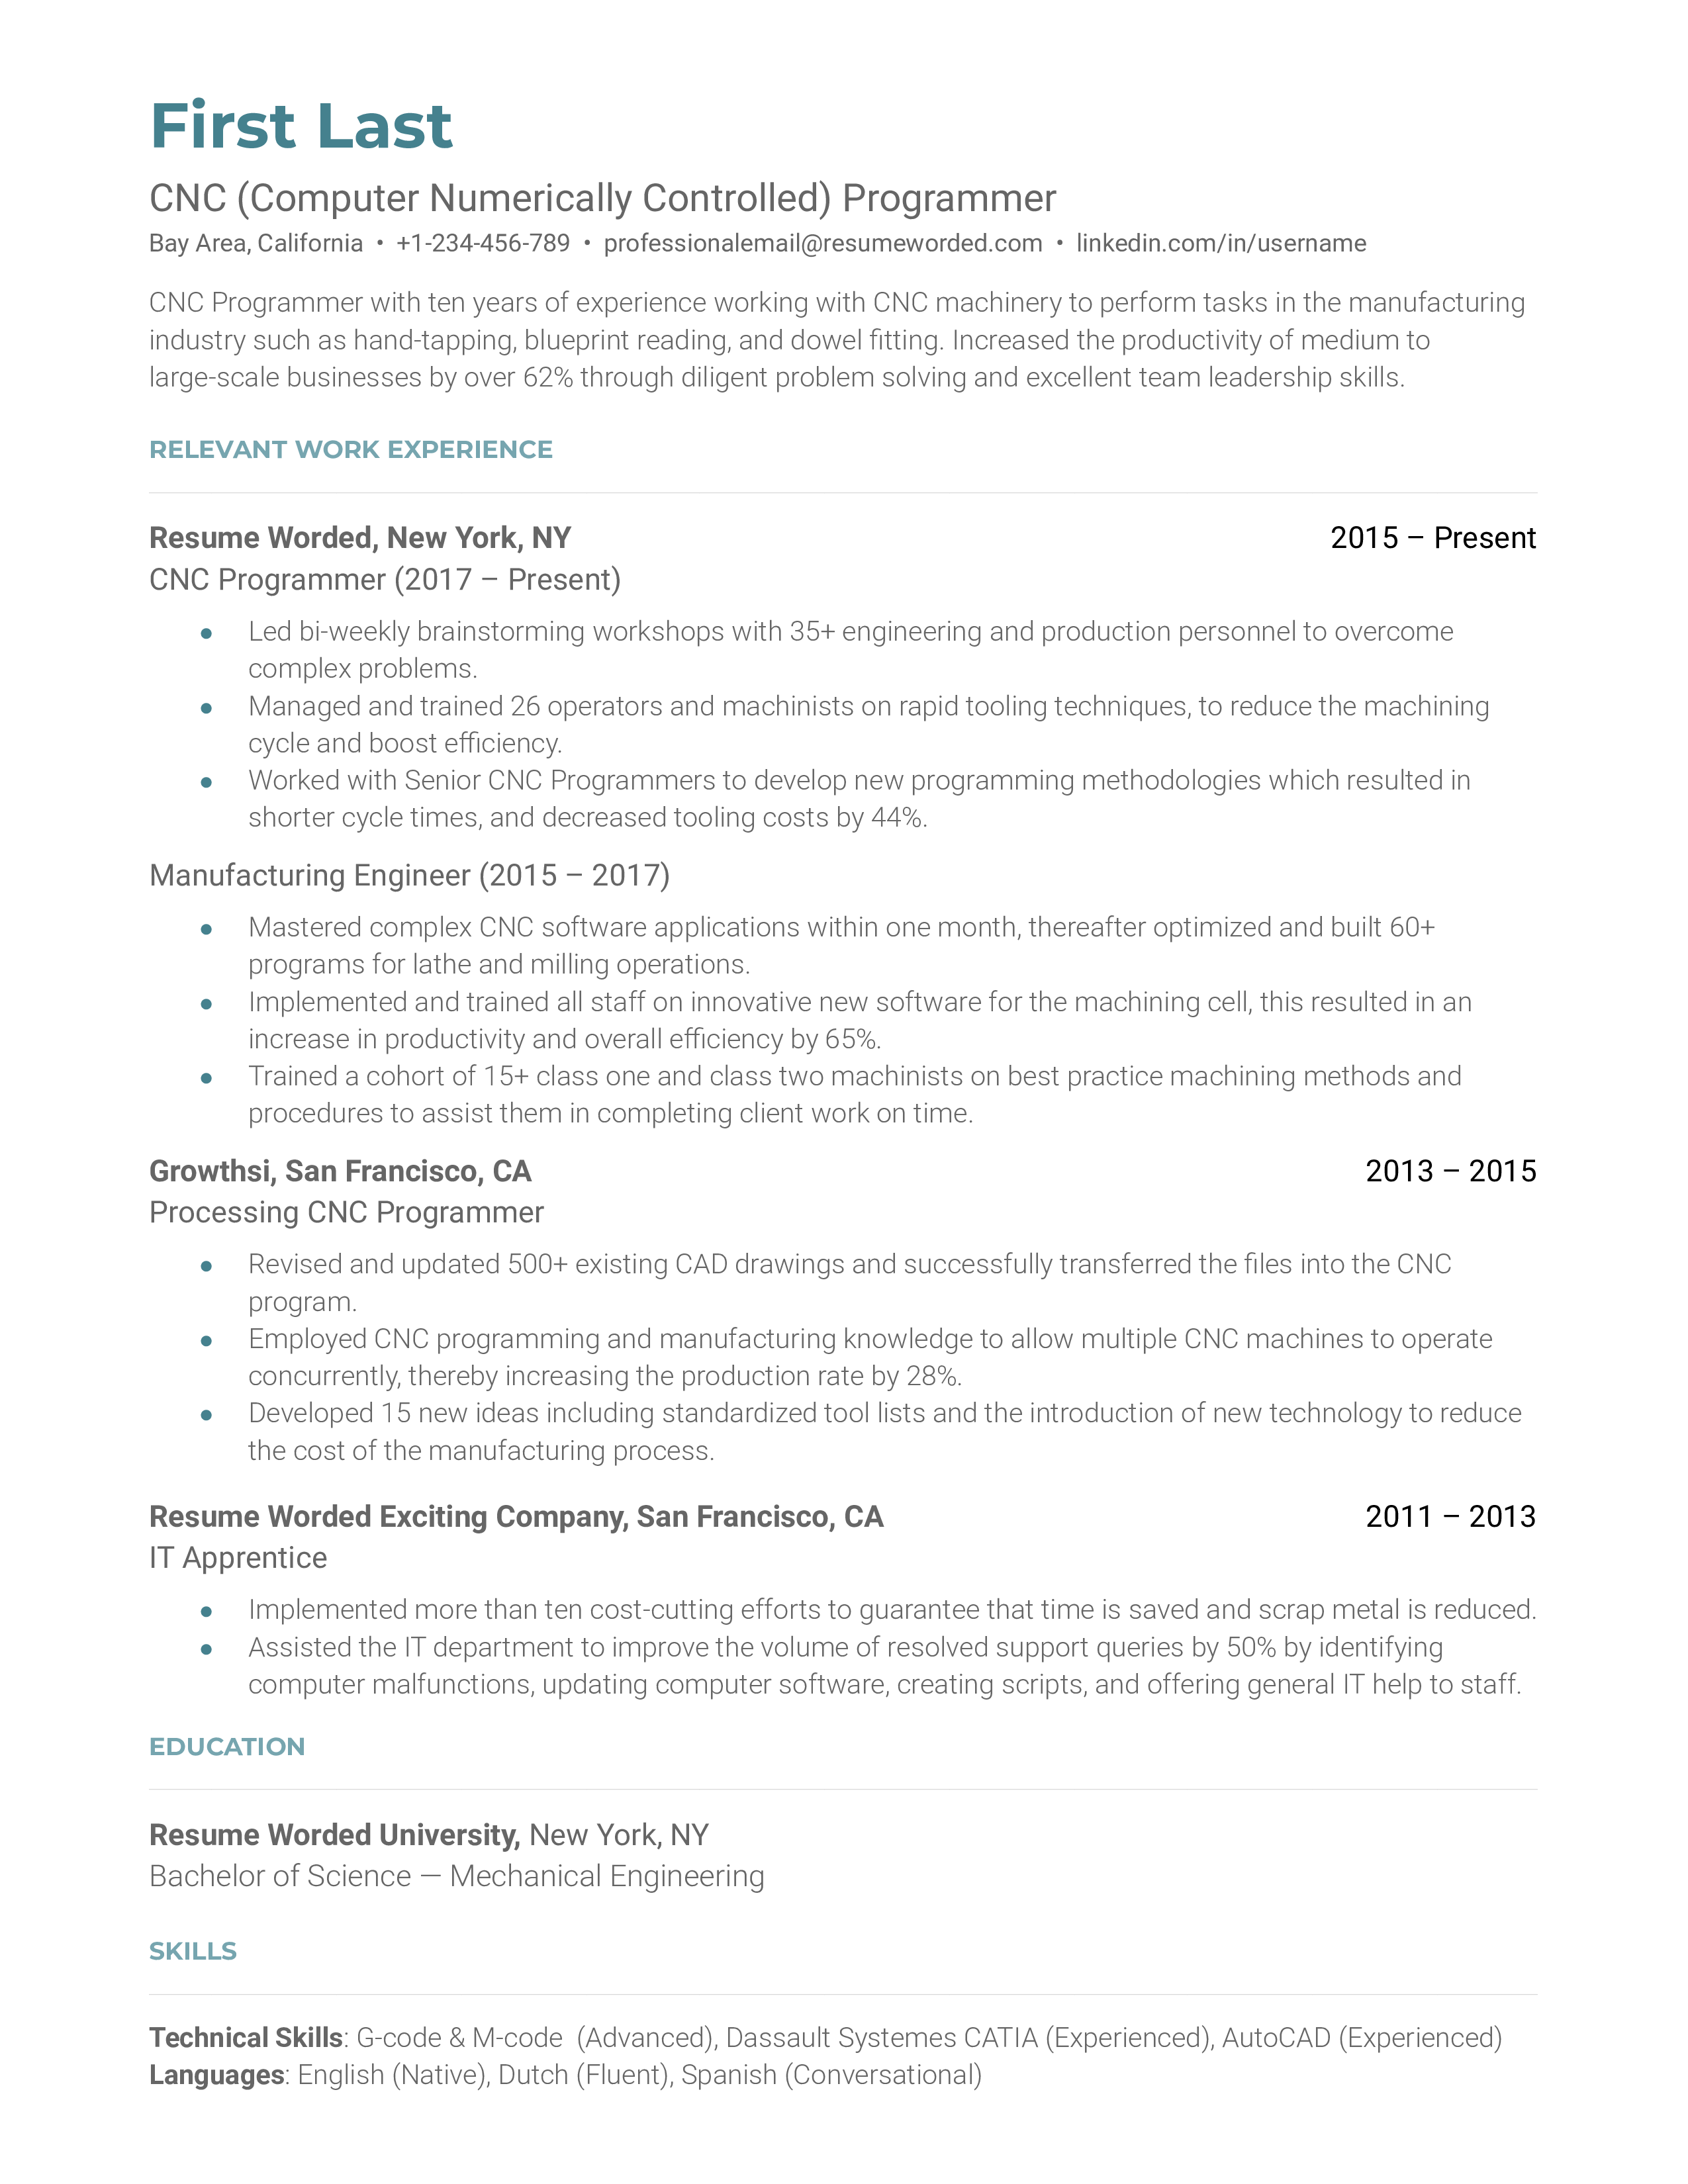 A CNC programmer's CV showcasing technical skills and project achievements